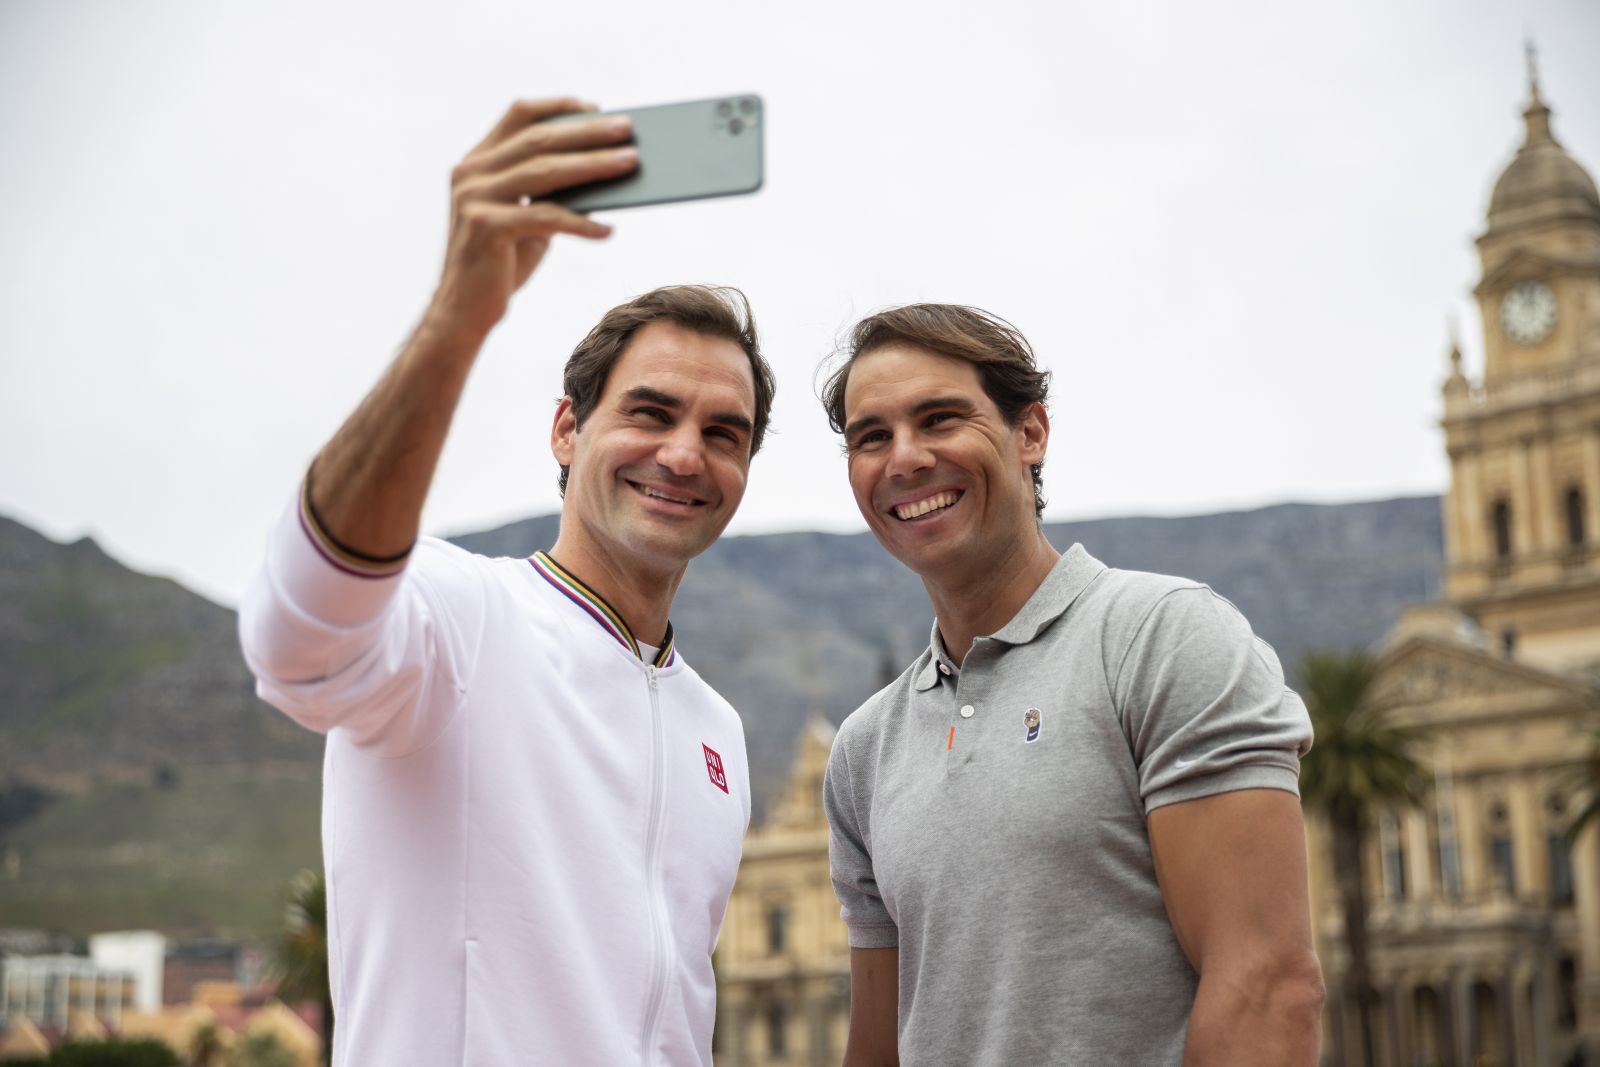 epa10185695 (FILE) - Roger Federer of Switzerland (L) and Rafael Nadal of Spain (R) take a selfie after playing mini tennis on the Cape Town Grand Parade infront of the City Hall and Table Mountain ahead of their exhibition match, South Africa 07 February 2020 (reissued 15 September 2022). Federer on 15 September 2022 released a statement reading that the Laver Cup held on 23-25 September in London will be his final ATP event to compete in.  EPA/NIC BOTHMA *** Local Caption *** 55855978